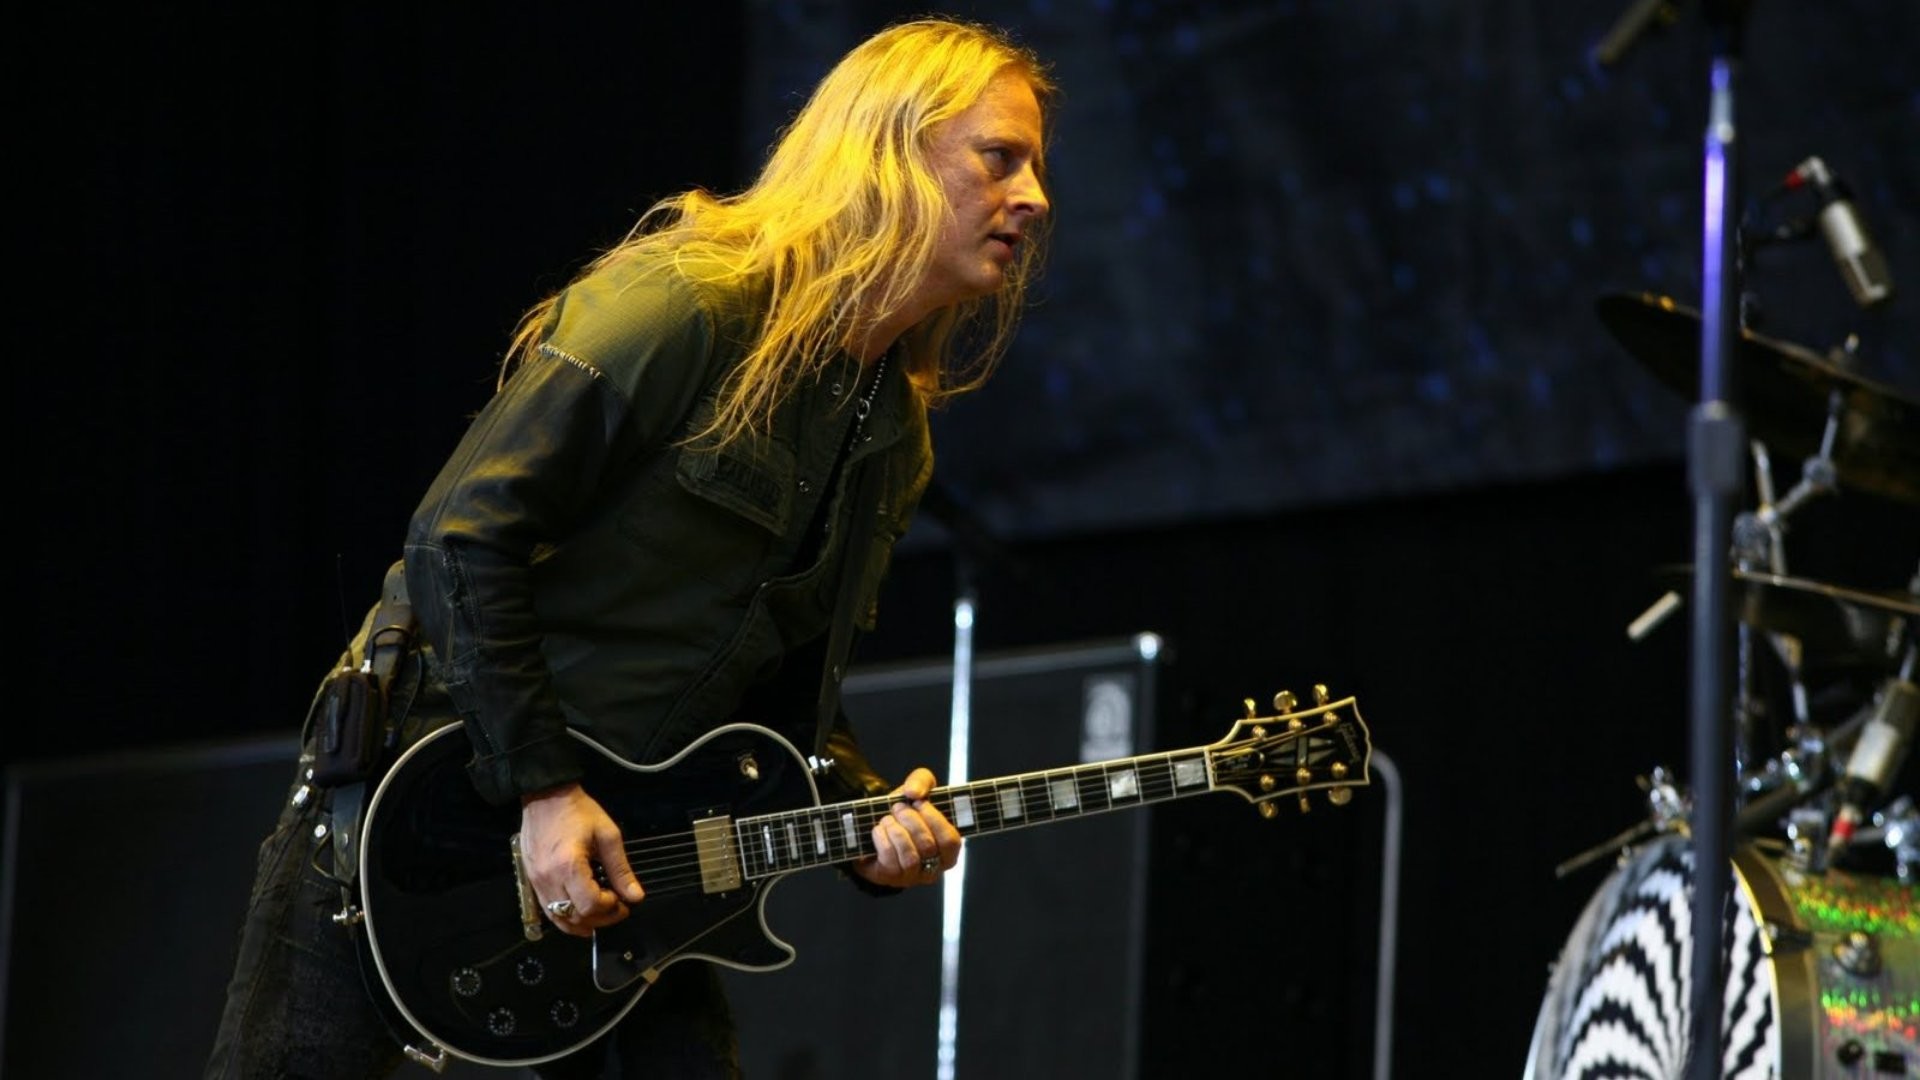 1920x1080  > Jerry Cantrell Wallpapers